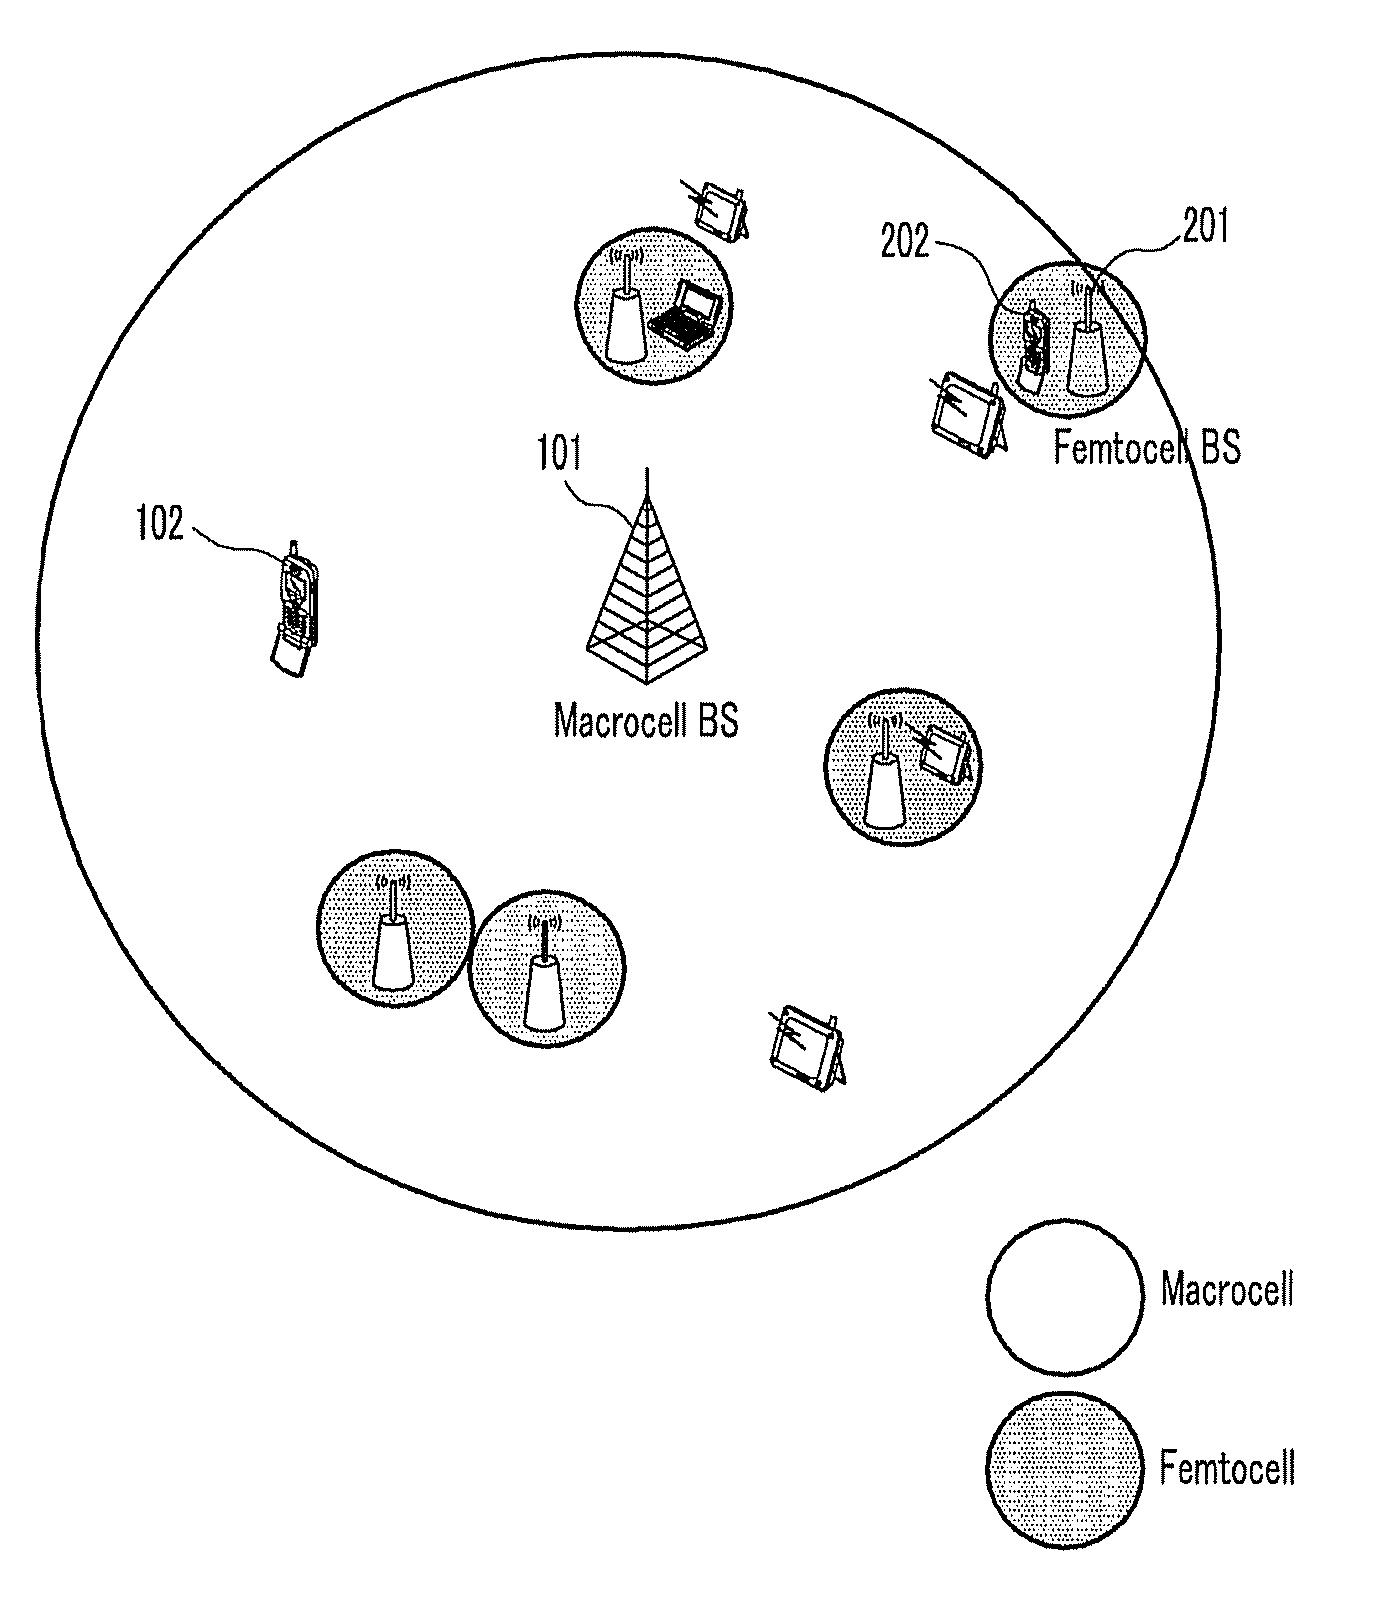 Power control and resource management method of femtocell base station in wideband wireless access system